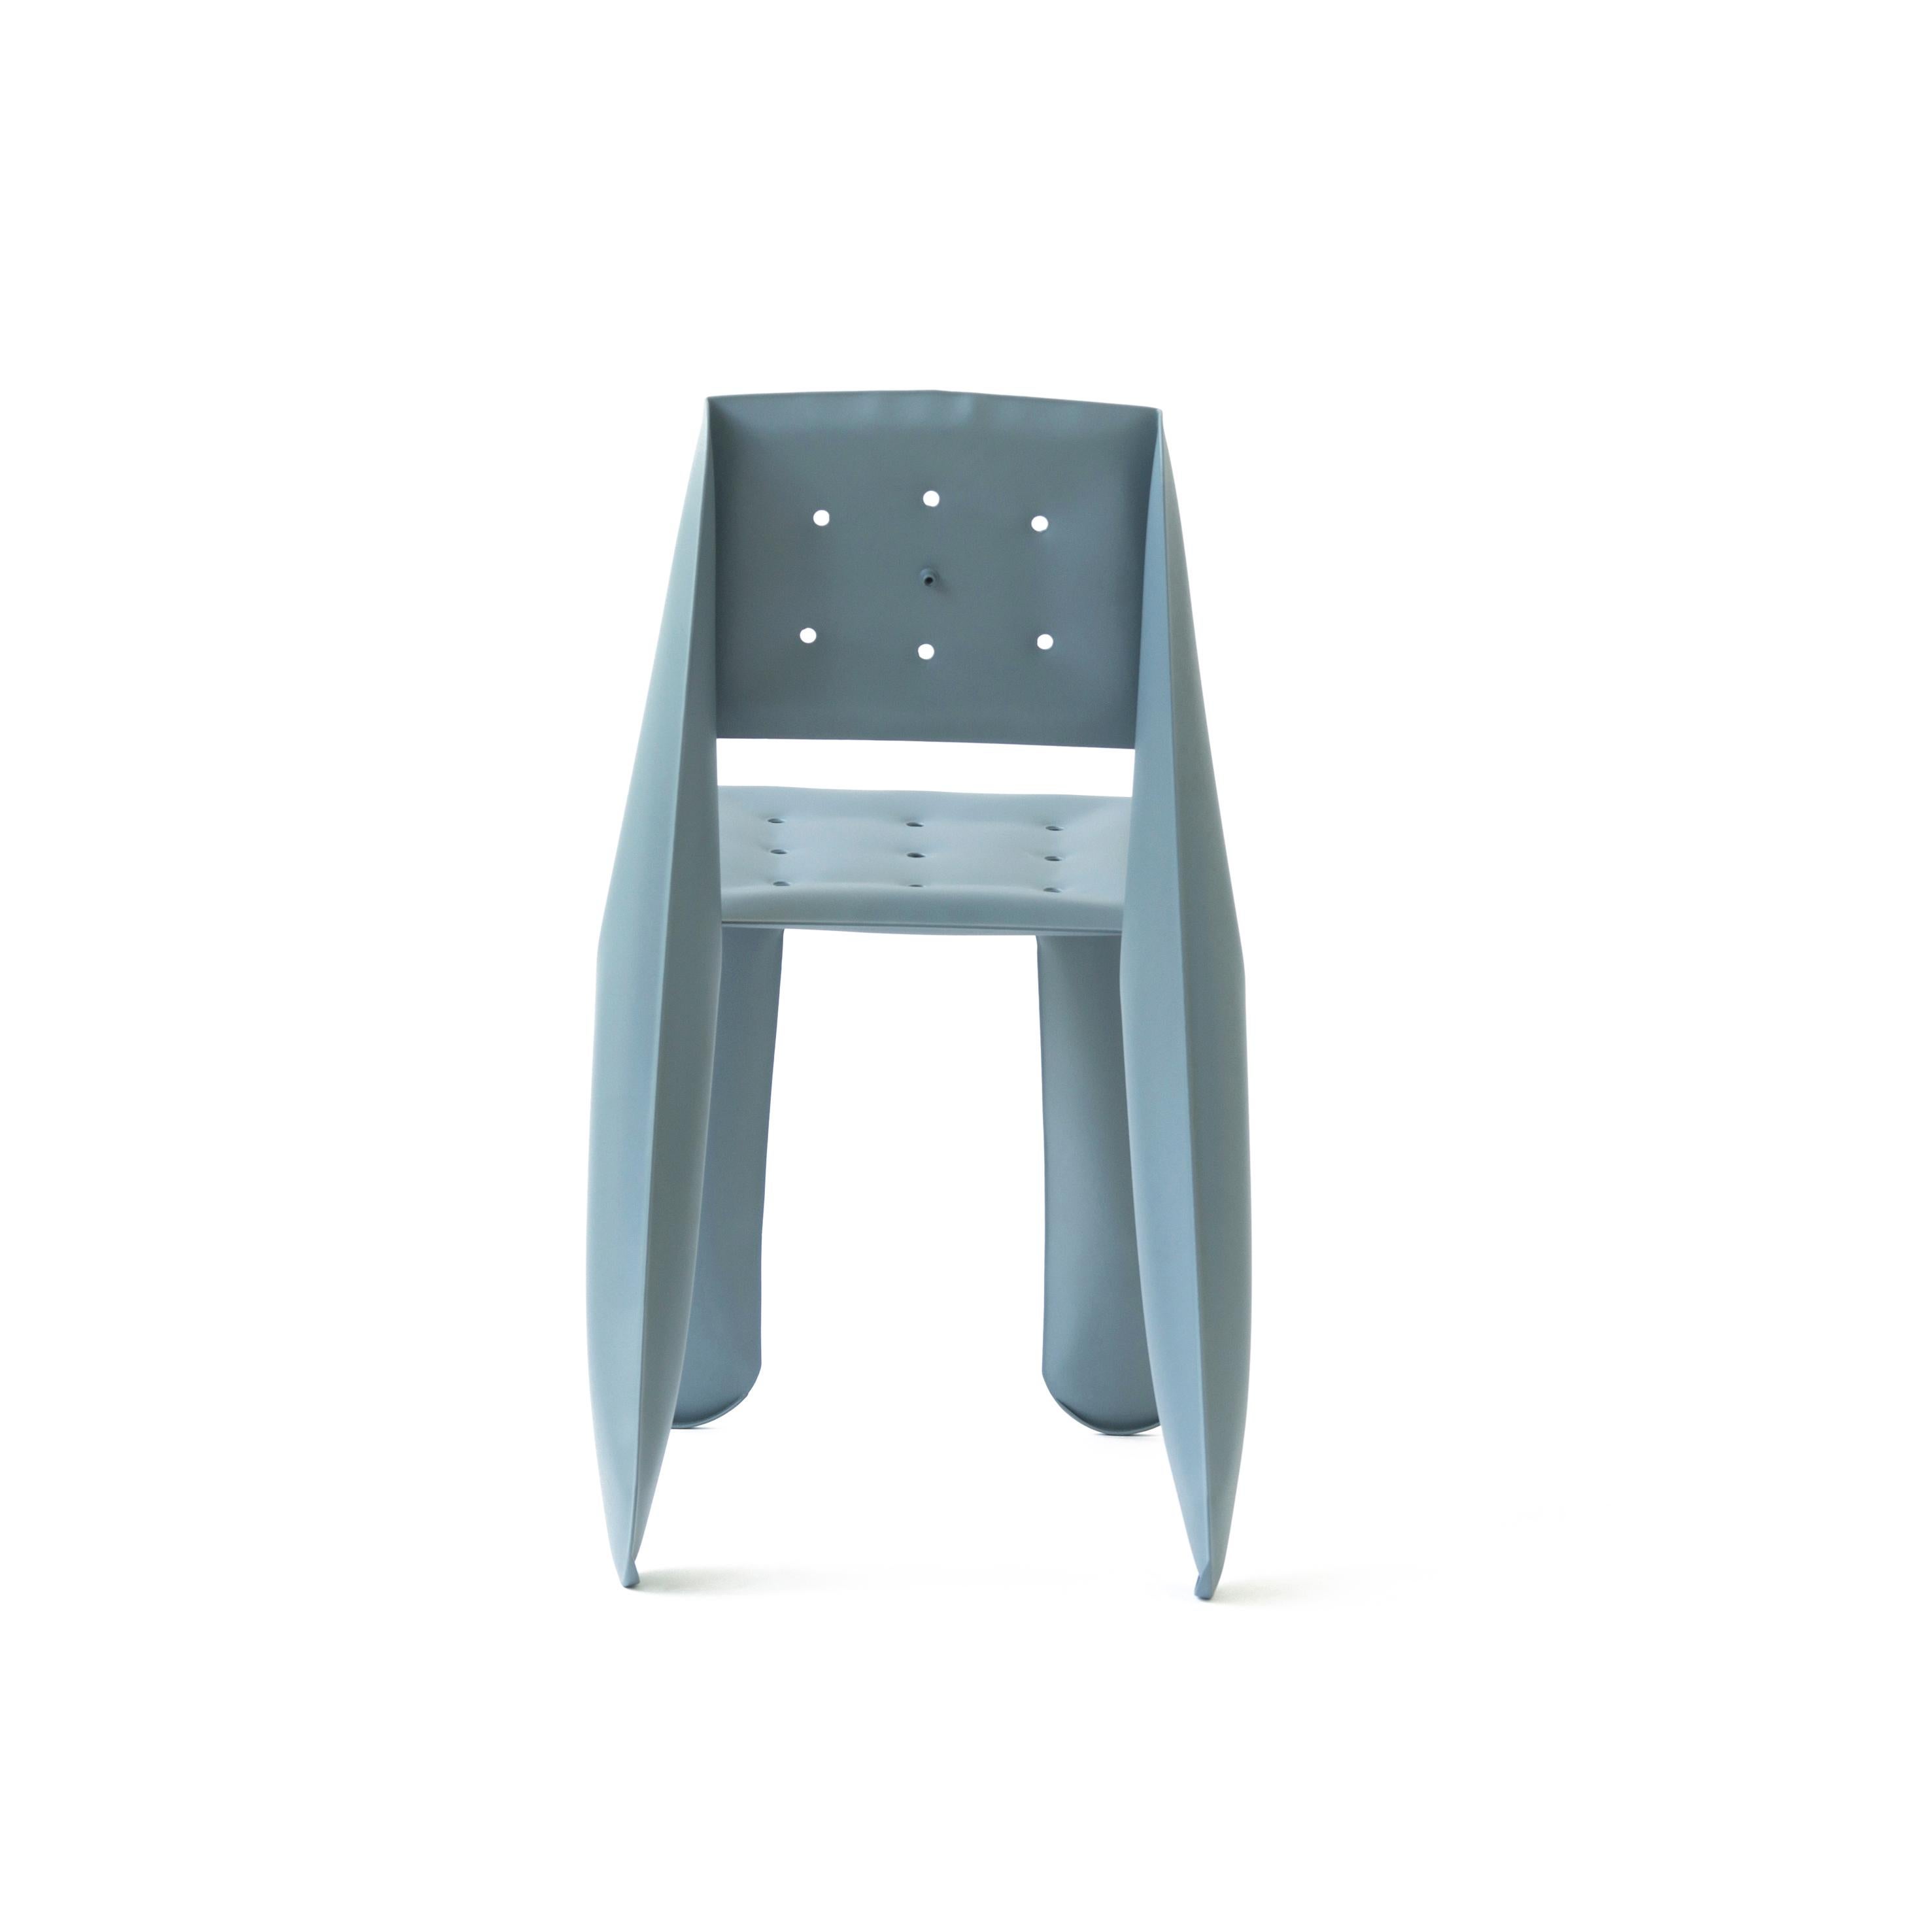 Powder-Coated Blue Grey Carbon Steel Chippensteel 0.5 Sculptural Chair by Zieta For Sale